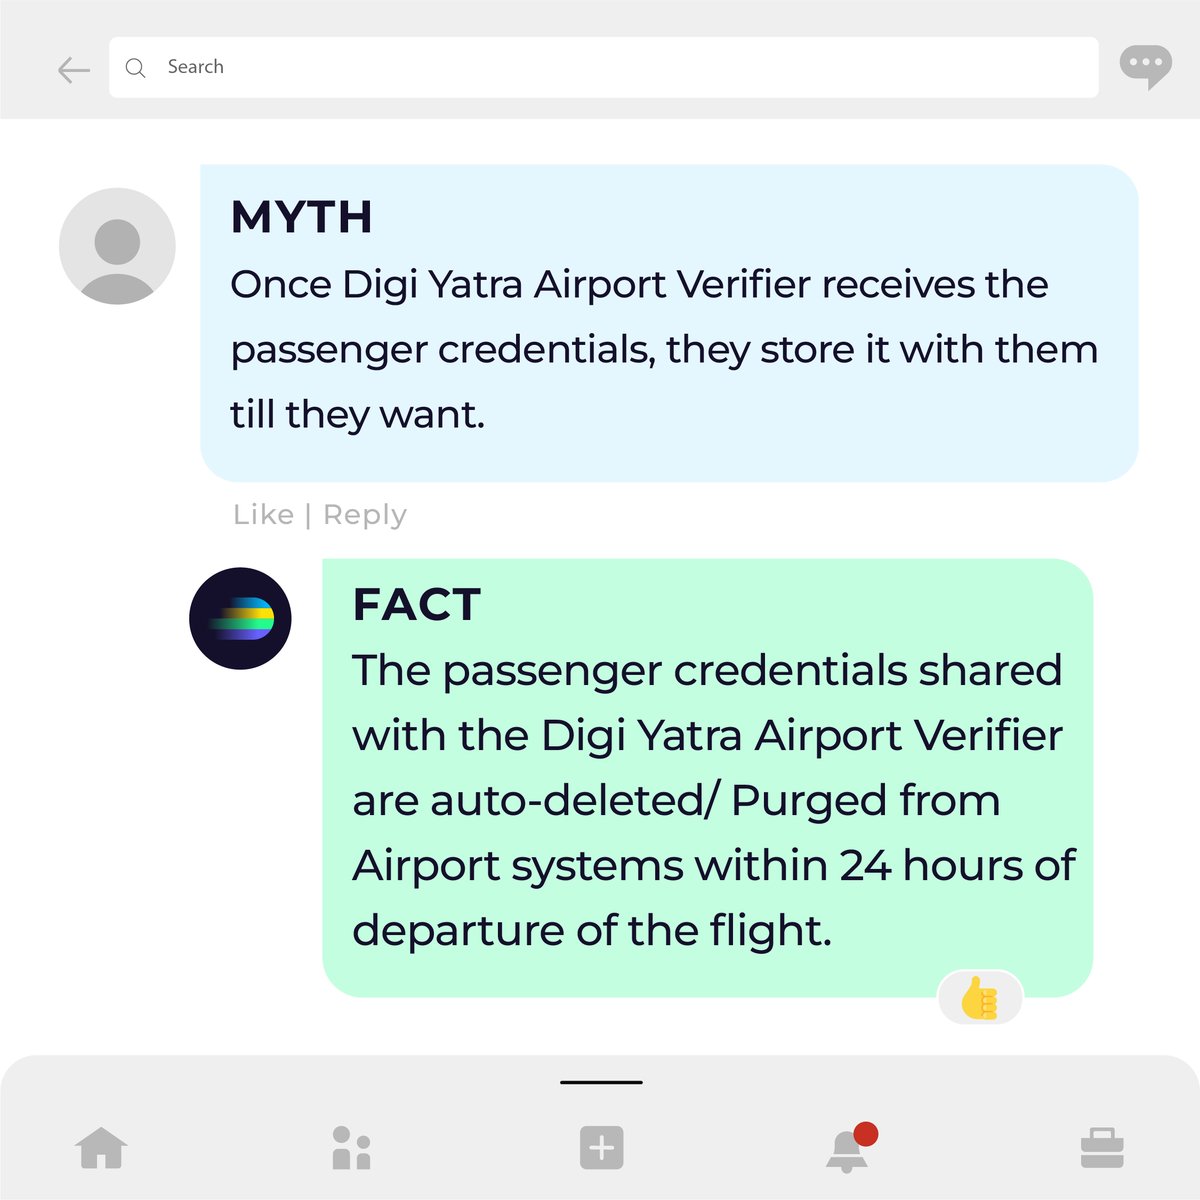 Separating myths from facts! 💡

Digi Yatra ensures the deletion of passenger credentials within 24 hours, prioritising data security and privacy.

Stay informed, stay secure!

Download the Digi Yatra App now!
Available on IOS and Android.
#DigiYatra #MythsVsFacts #DataSecurity